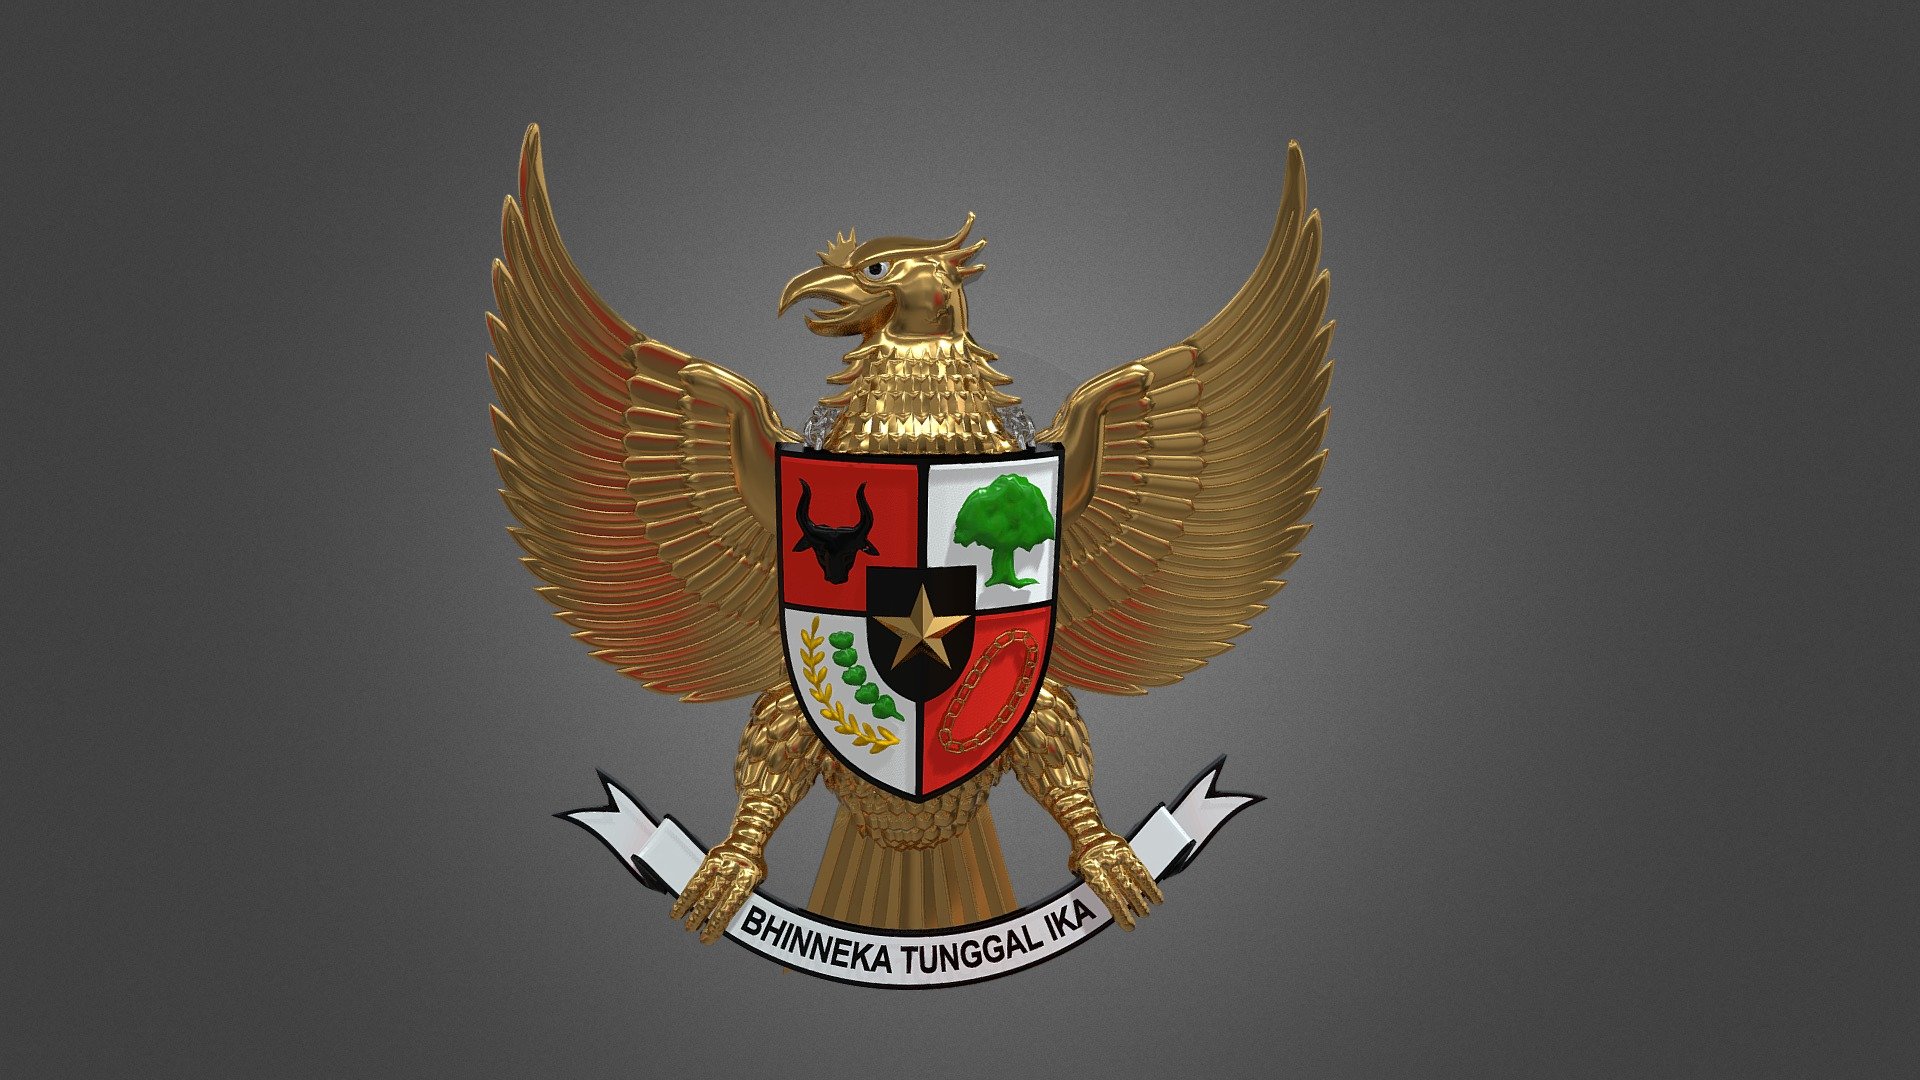 The national emblem or coat of arms of Indonesia is called Garuda Pancasila.[2] The main part is the Garuda with a heraldic shield on its chest and a scroll gripped by its legs. The shield's five emblems represent Pancasila, the five principles of Indonesia's national ideology 3d model